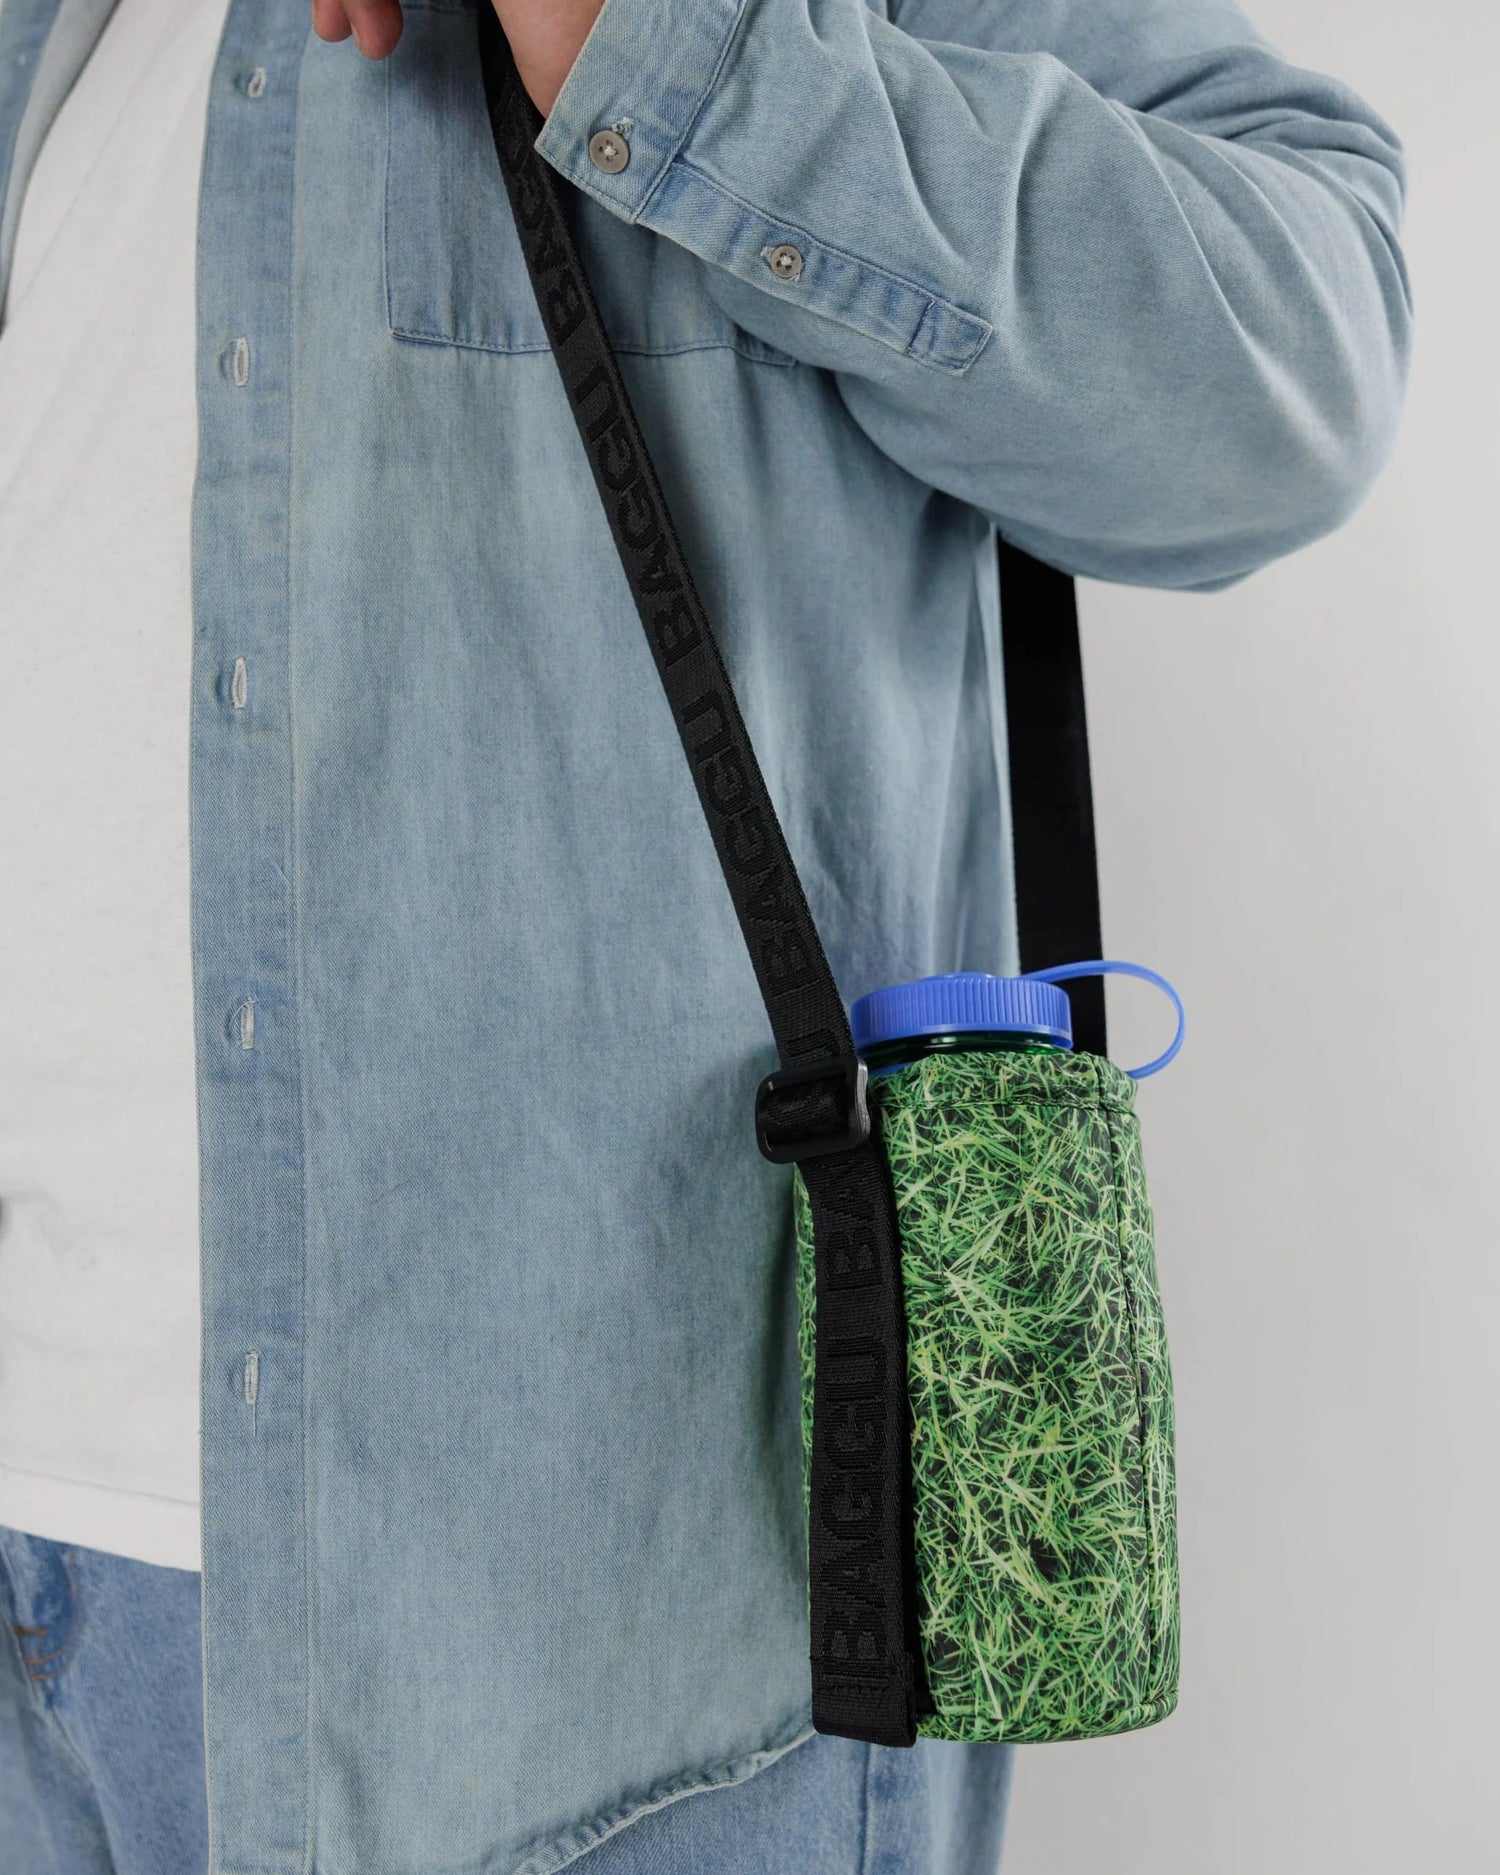 Puffy Water Bottle Sling with Grass Graphic Pattern with Adjustable Black Crossbody Strap with De-bossed "BAGGU" Text 